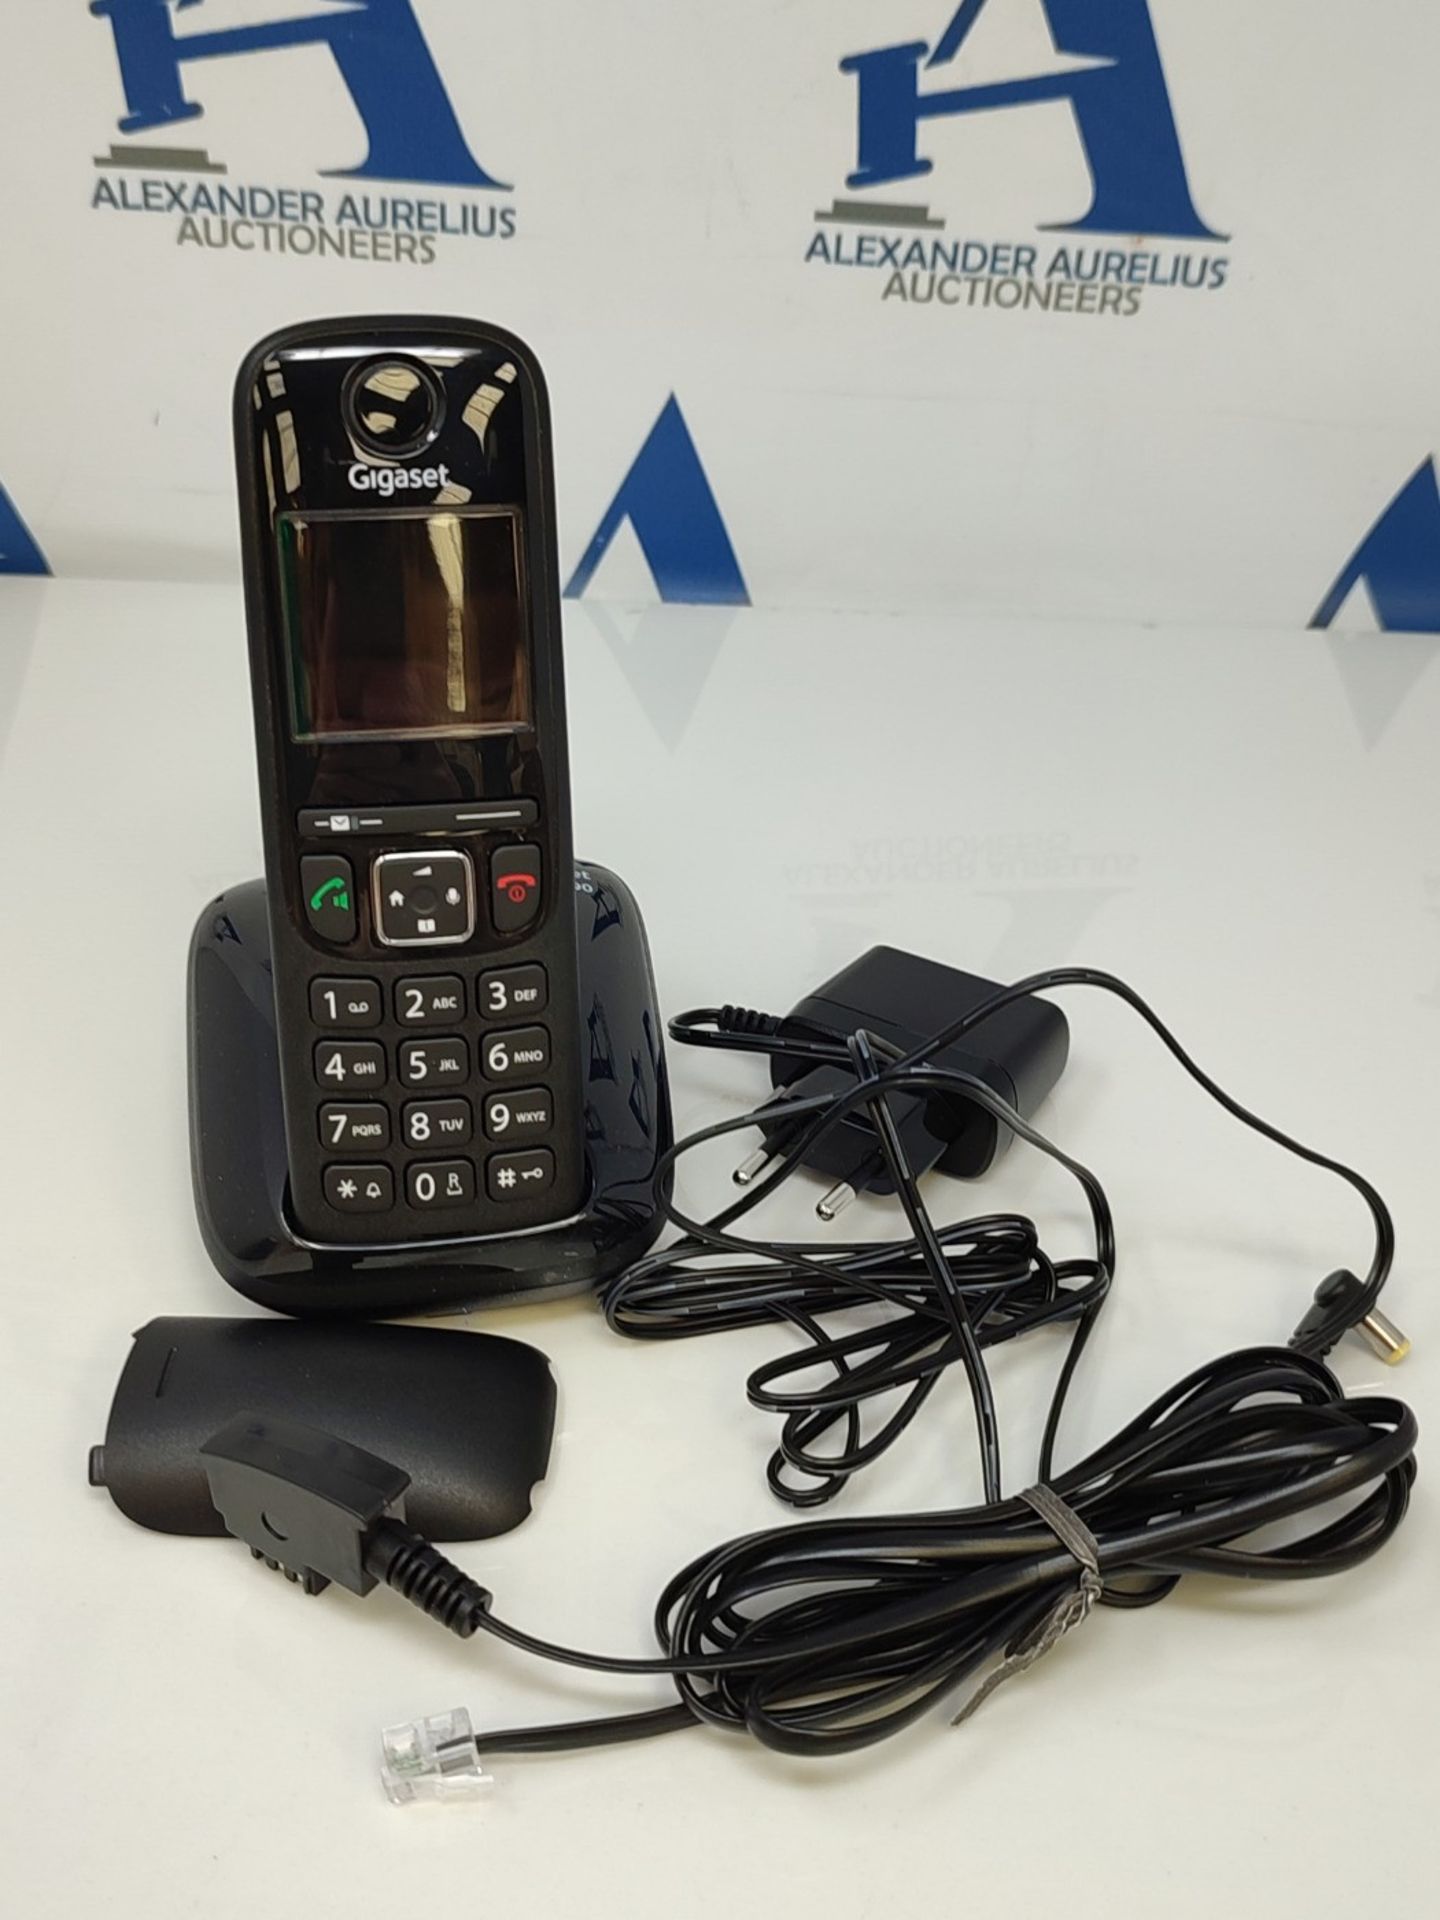 Gigaset AS690 - Cordless DECT Telephone - large, high-contrast display - brilliant aud - Image 2 of 4